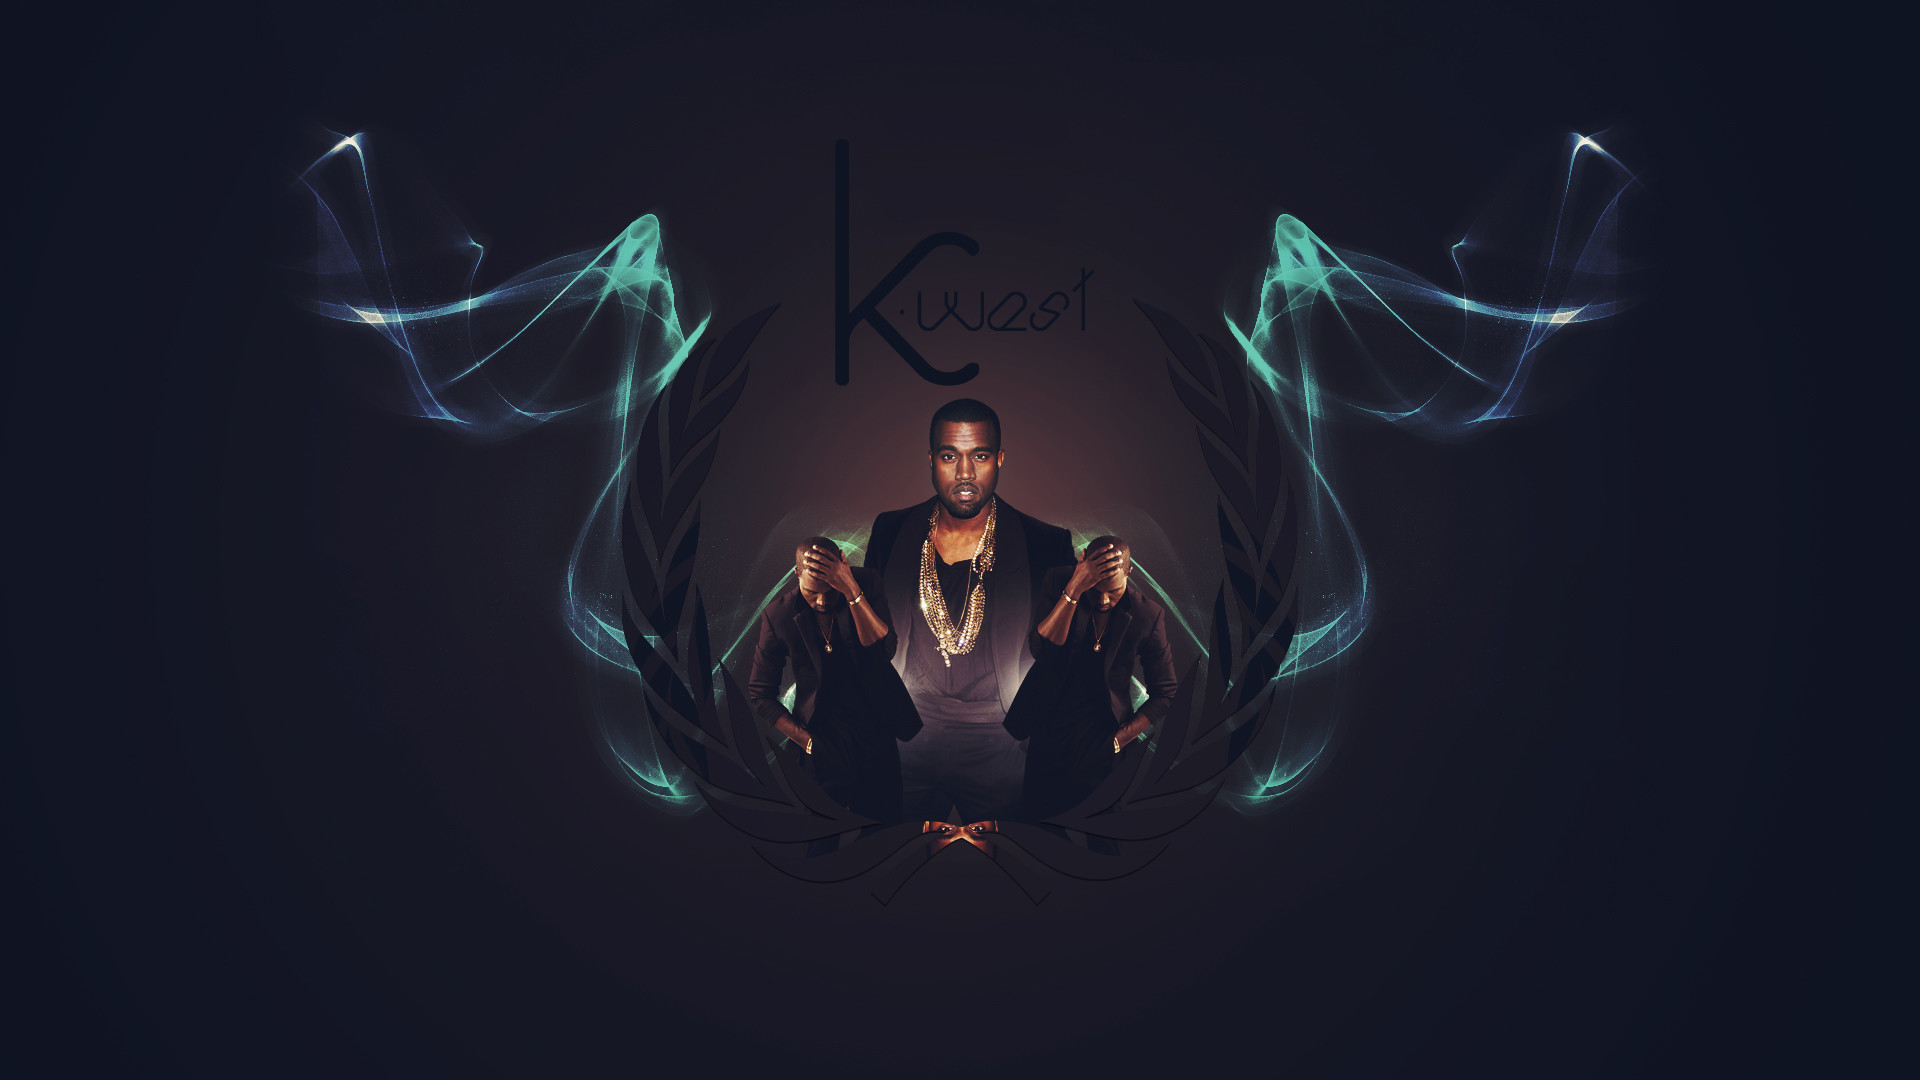 Kanye West Power Wallpapers Images As Wallpaper HD